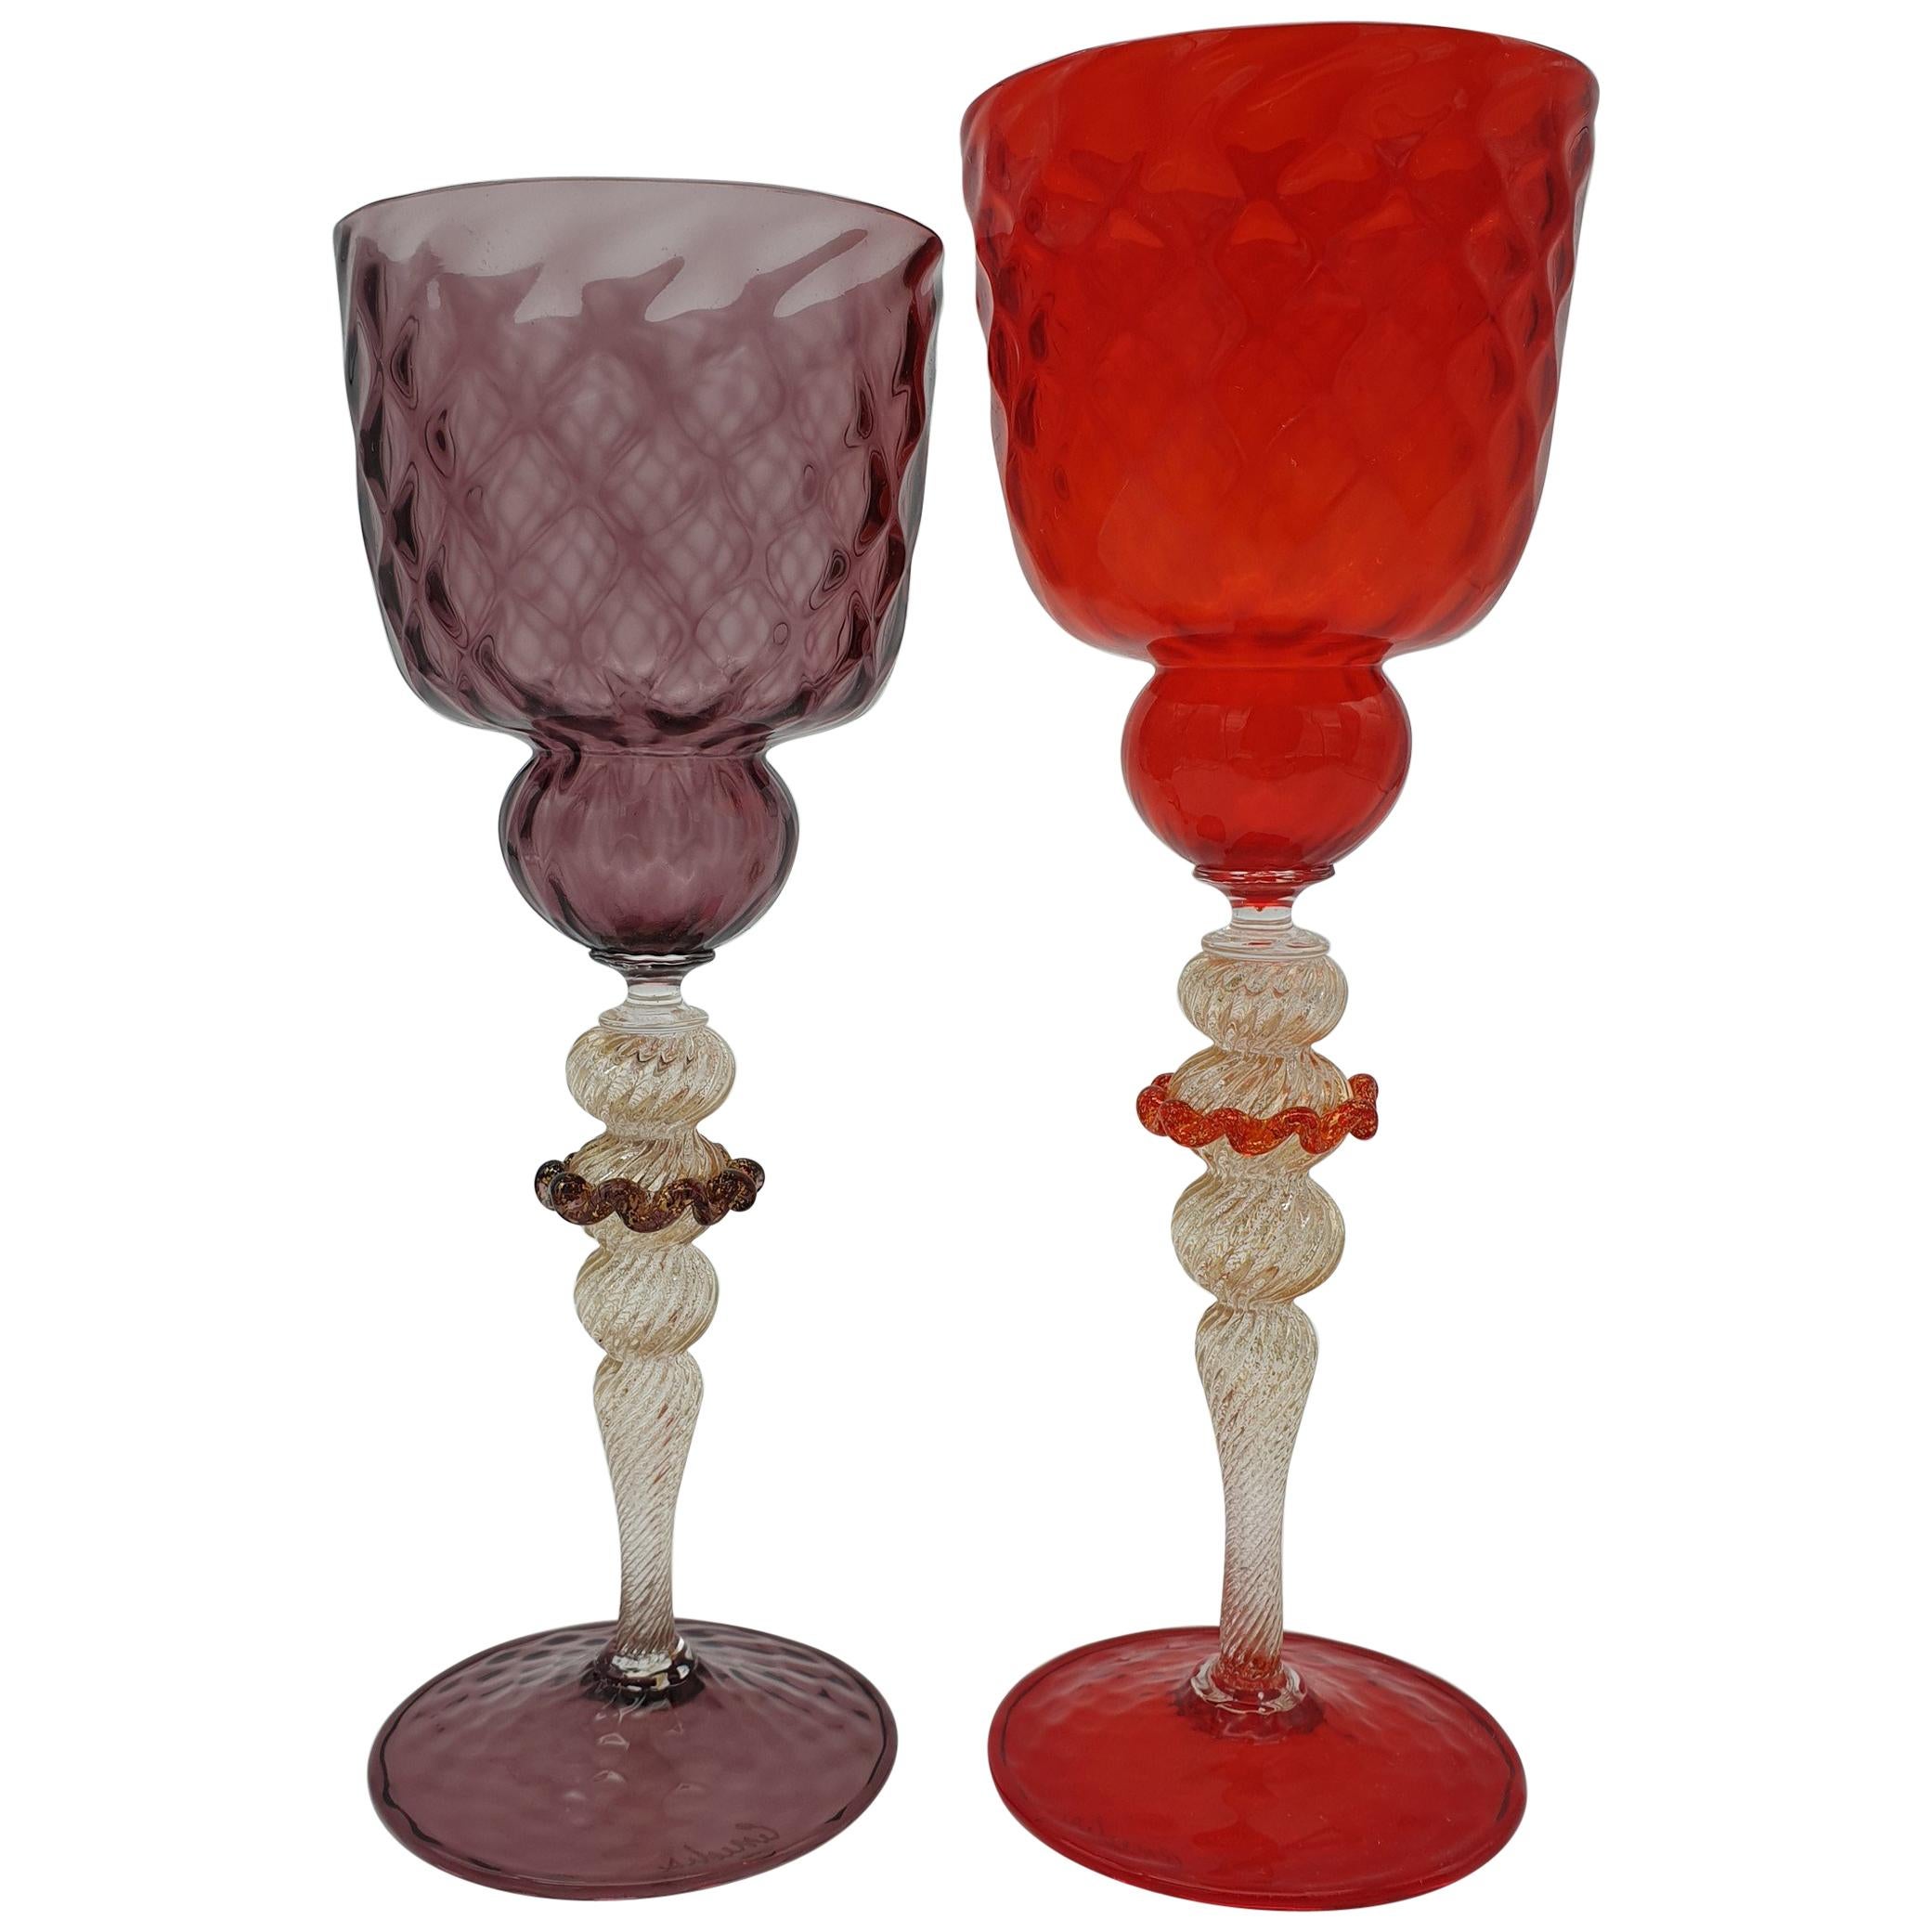 Pair of Modern Murano Glass Goblets by Gino Cenedese, Red & Amethyst, Late 1990s For Sale